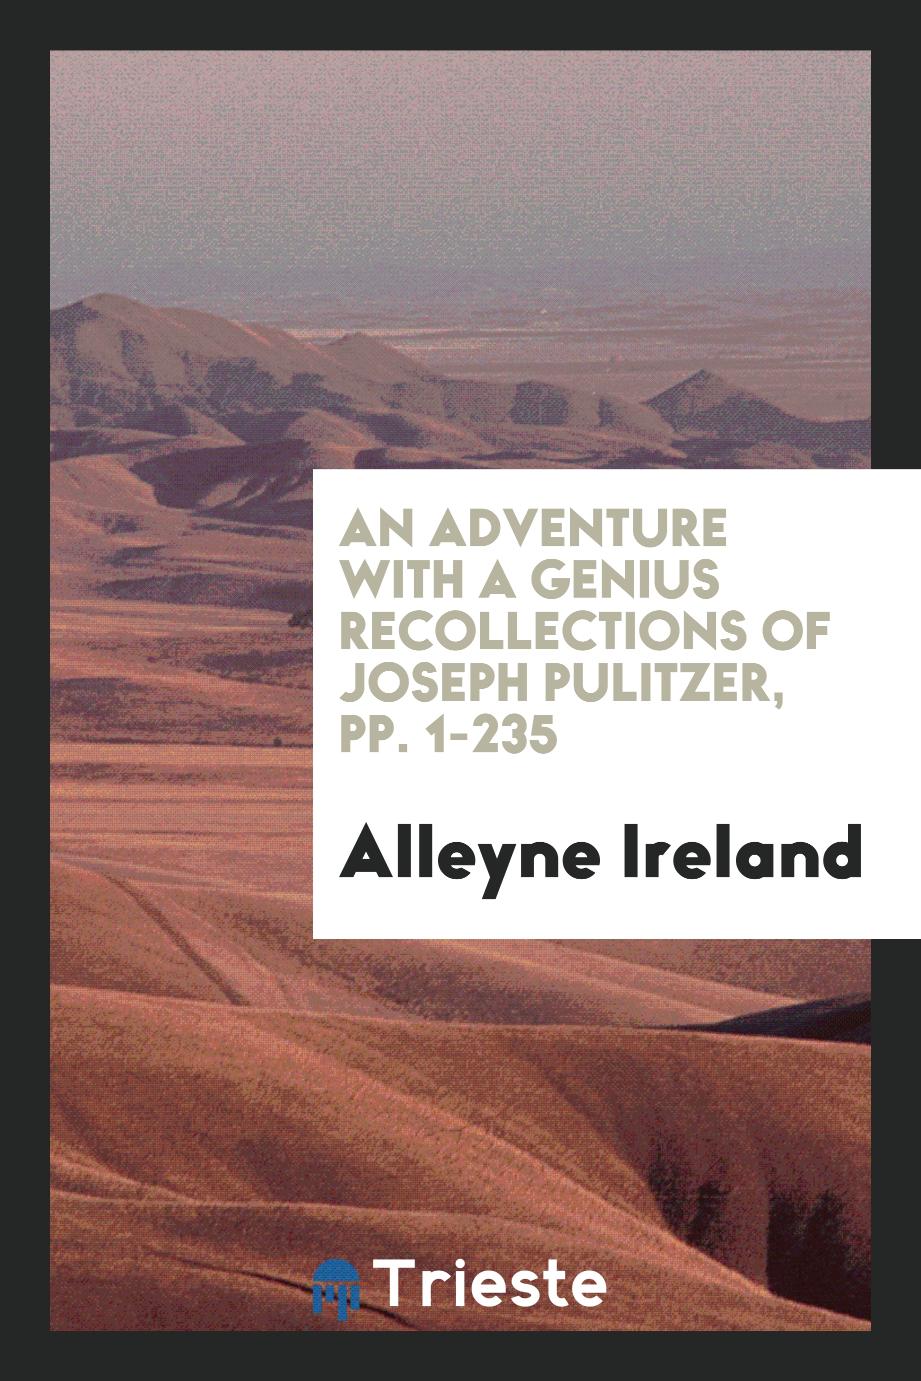 An Adventure with a Genius Recollections of Joseph Pulitzer, pp. 1-235